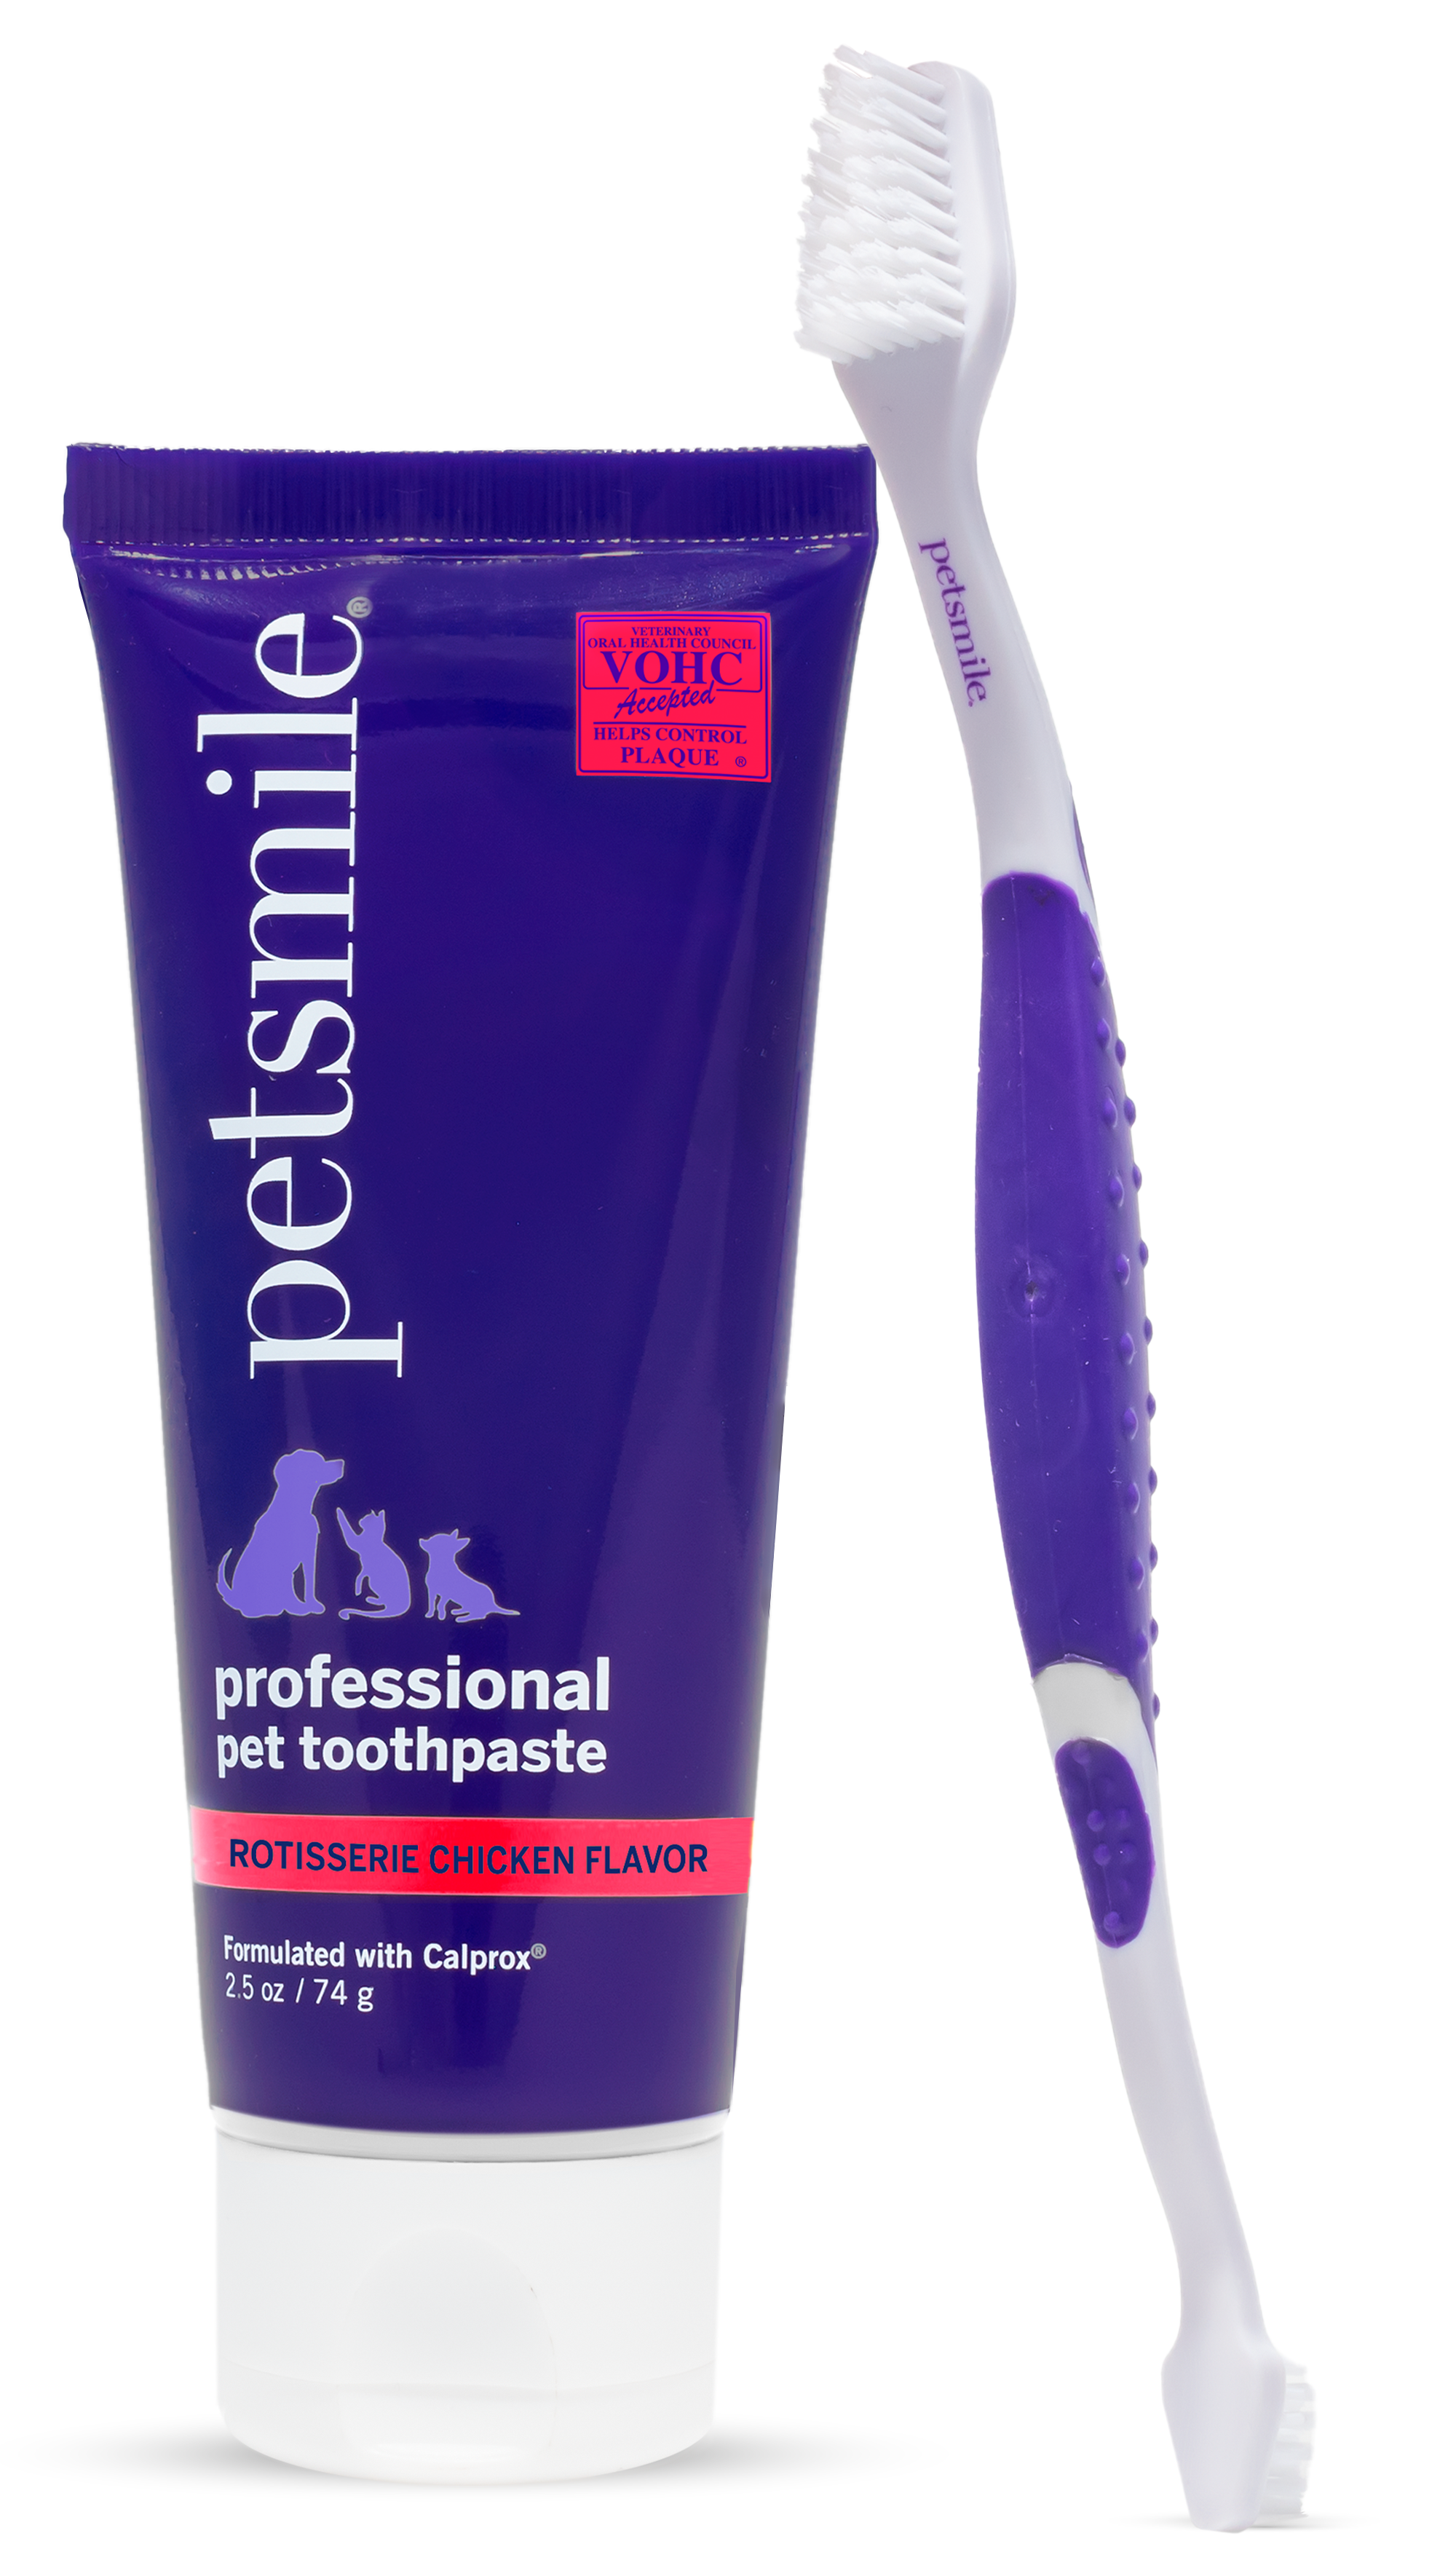 Complete dental care for dogs , Purple petsmile dog brush and toothpaste kit , 45-degree angle brush and toothpaste , VOHC approved dog toothpaste in Roisserie Chicken flavor , petsmile dental care for professional results